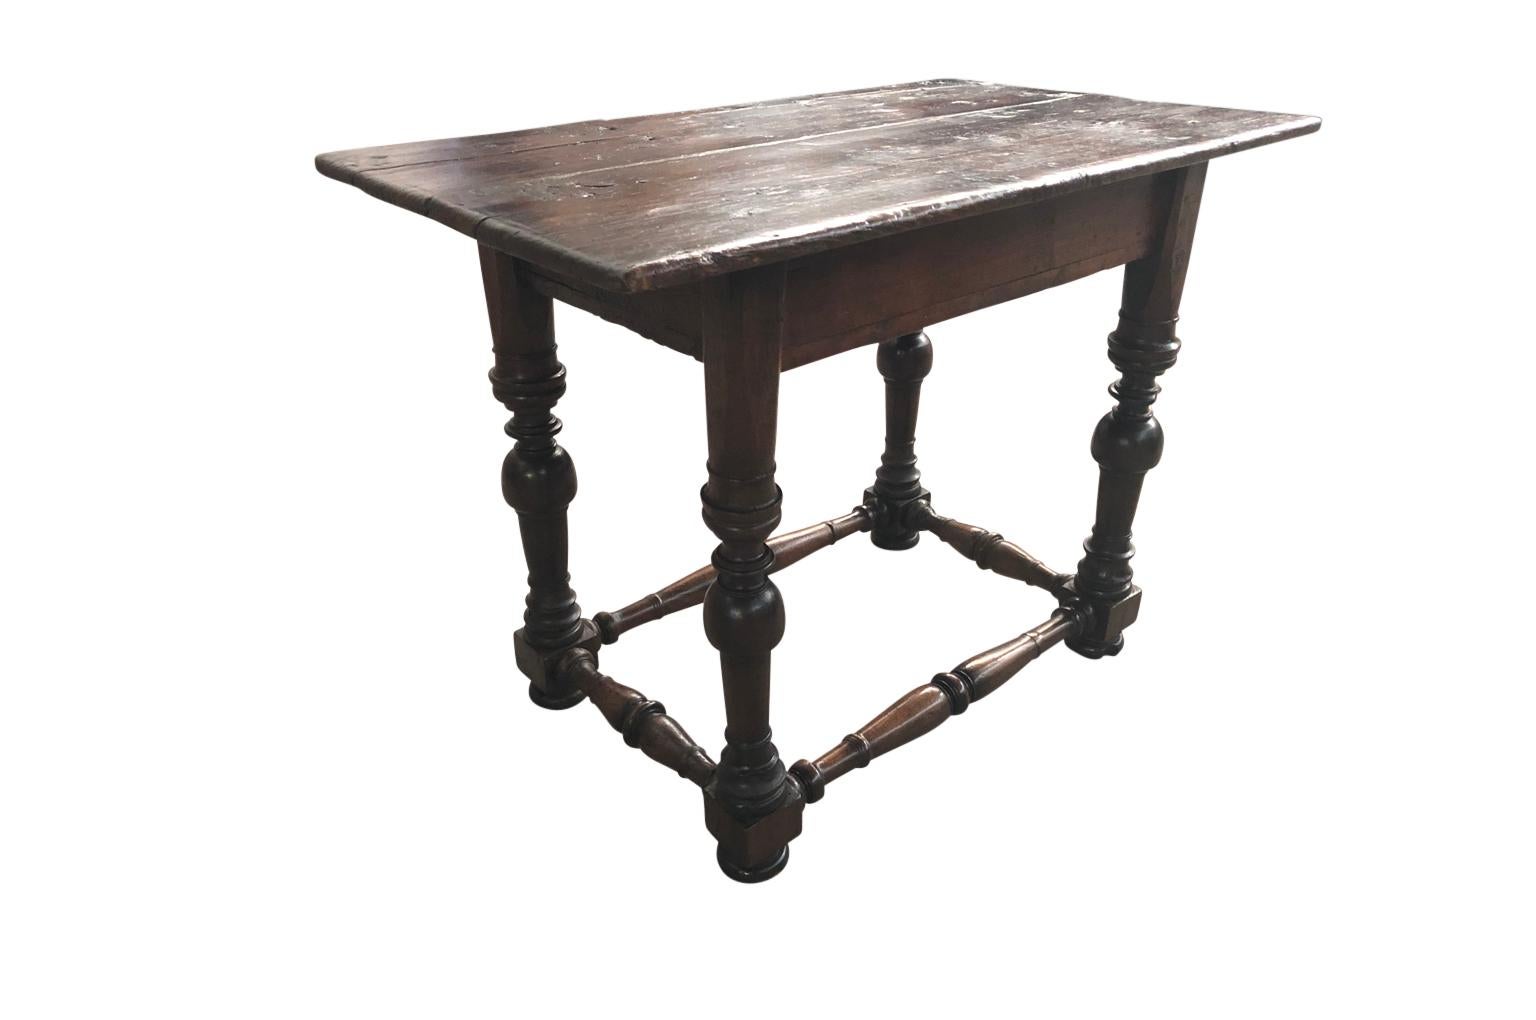 A very handsome Louis XIII style side table, console from Northern Italy. Nicely constructed from richly stained pine with beautifully turned legs and stretchers. Wonderful patina, rich and luminous.